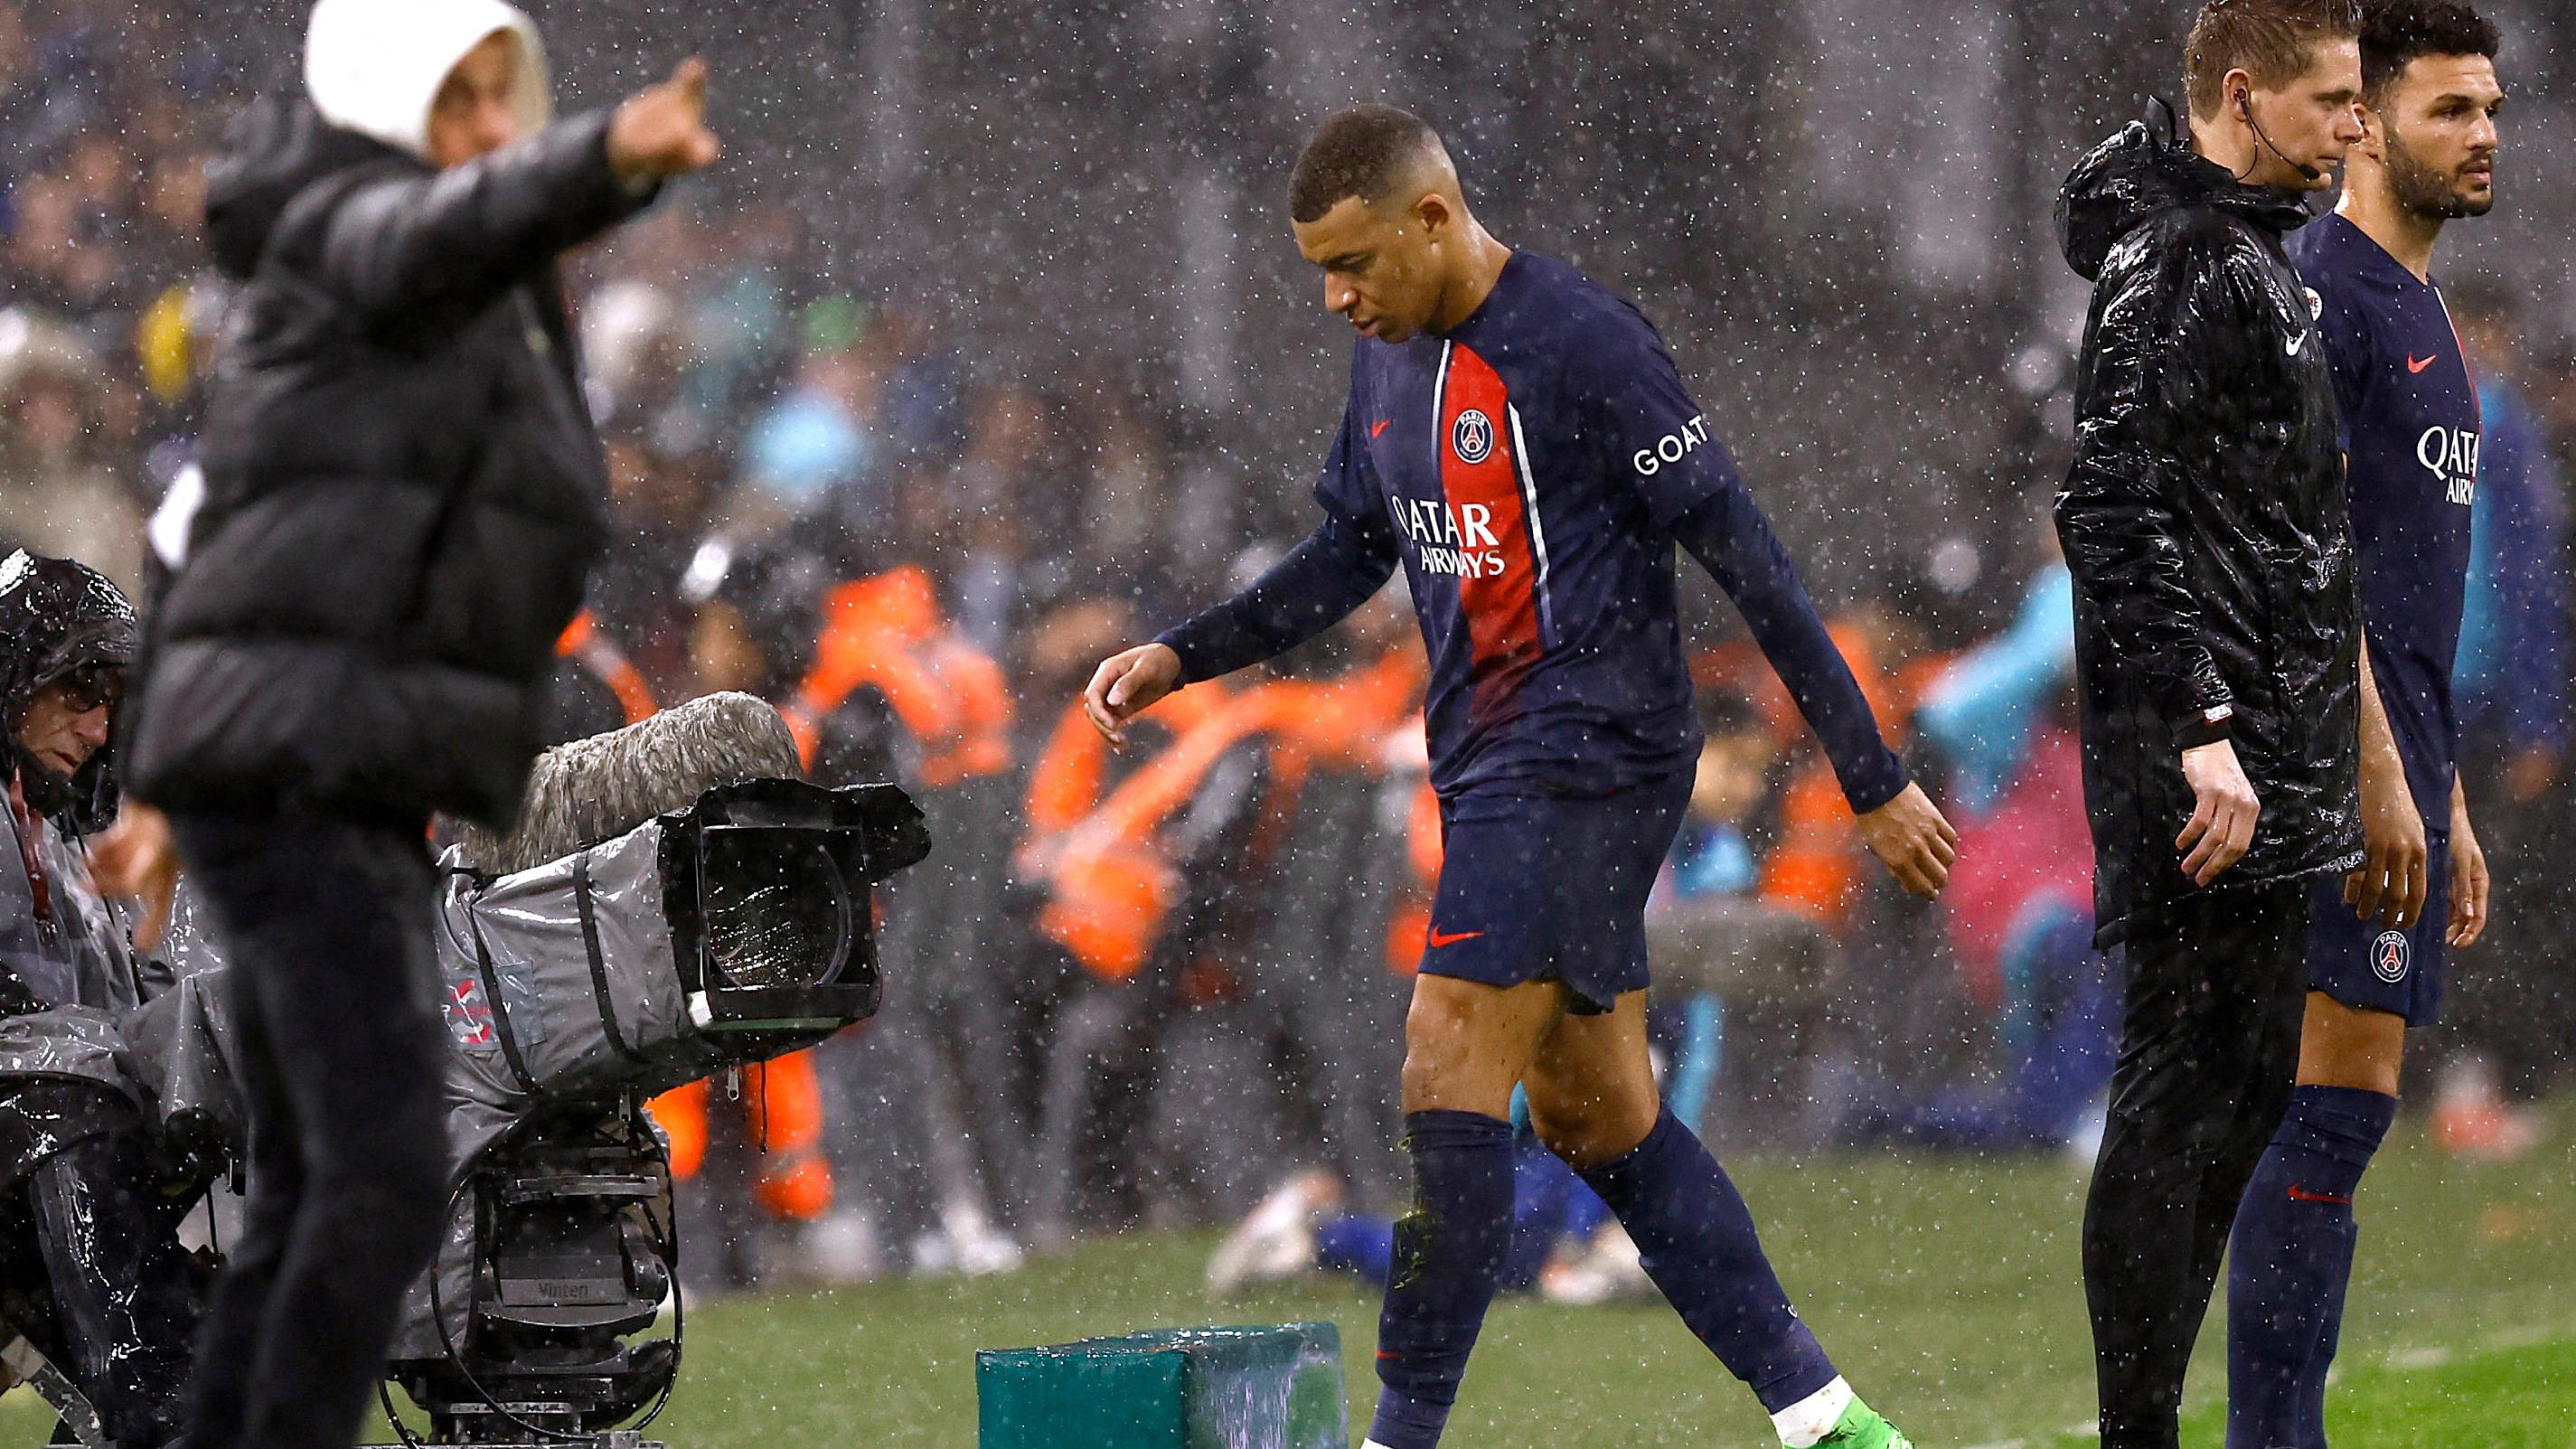 Coupe de France: at what time and on which channel to watch PSG-Rennes?